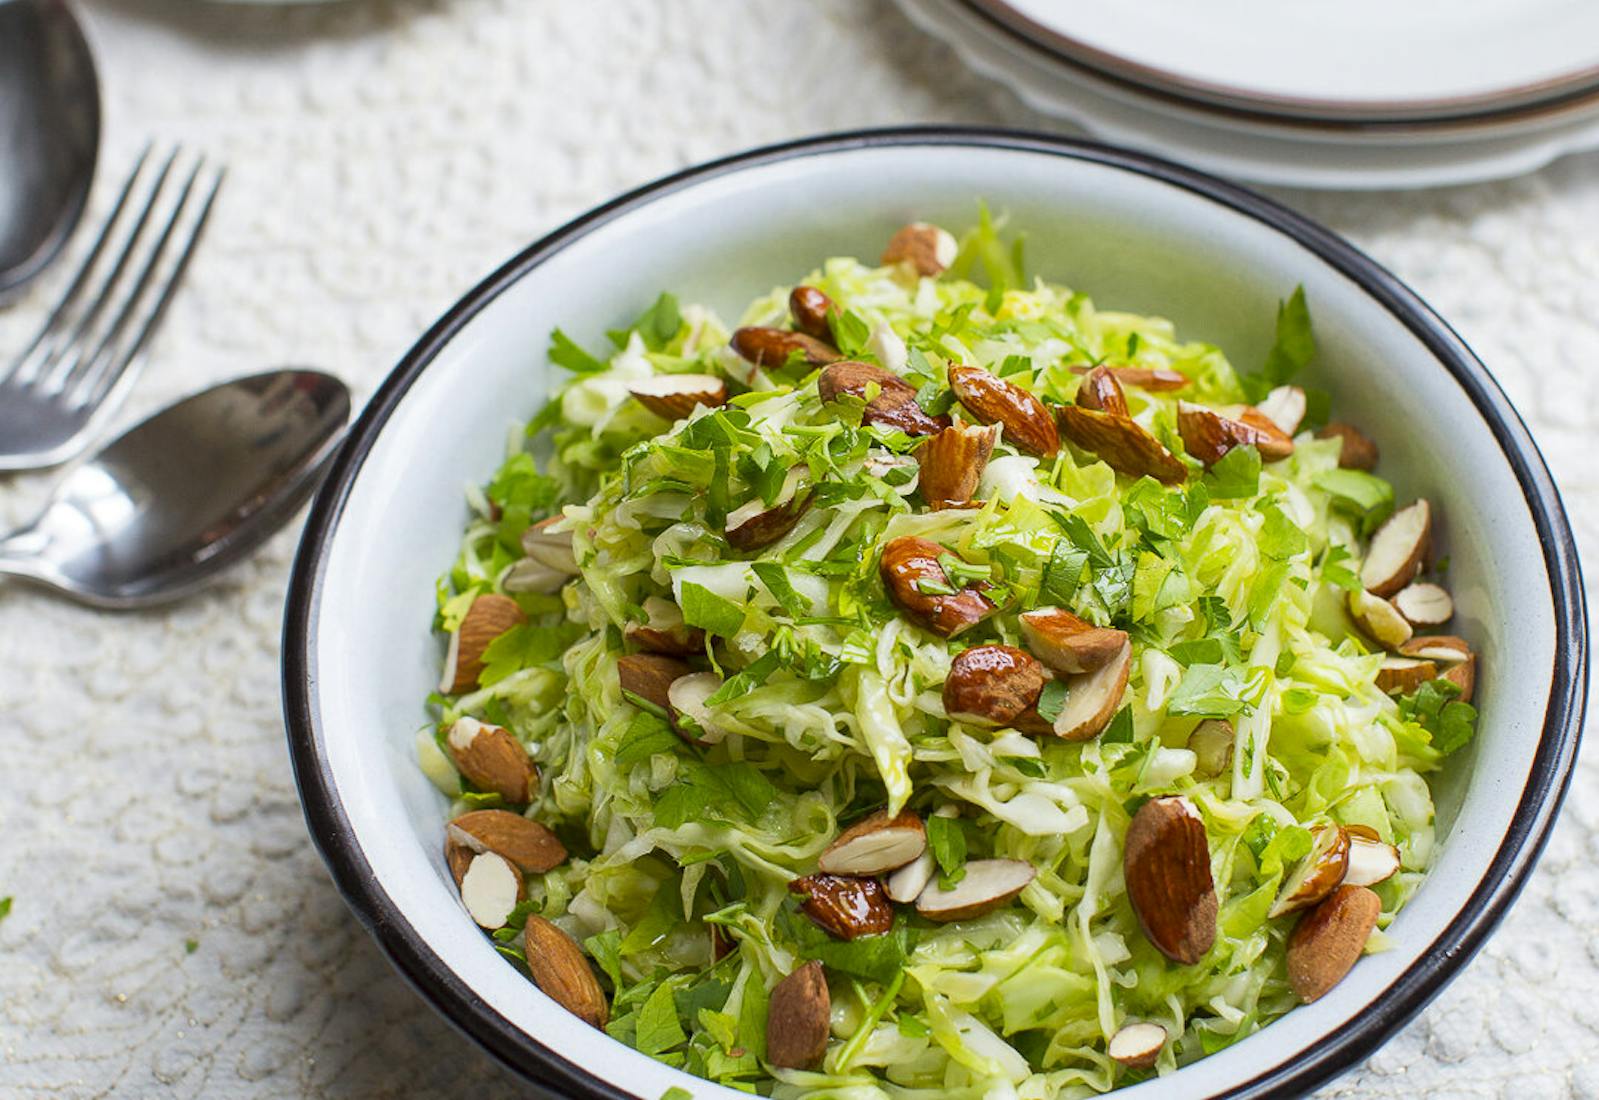 Cabbage salad with chopped almonds alongside dish with lemon wedges atop white tablecloth.